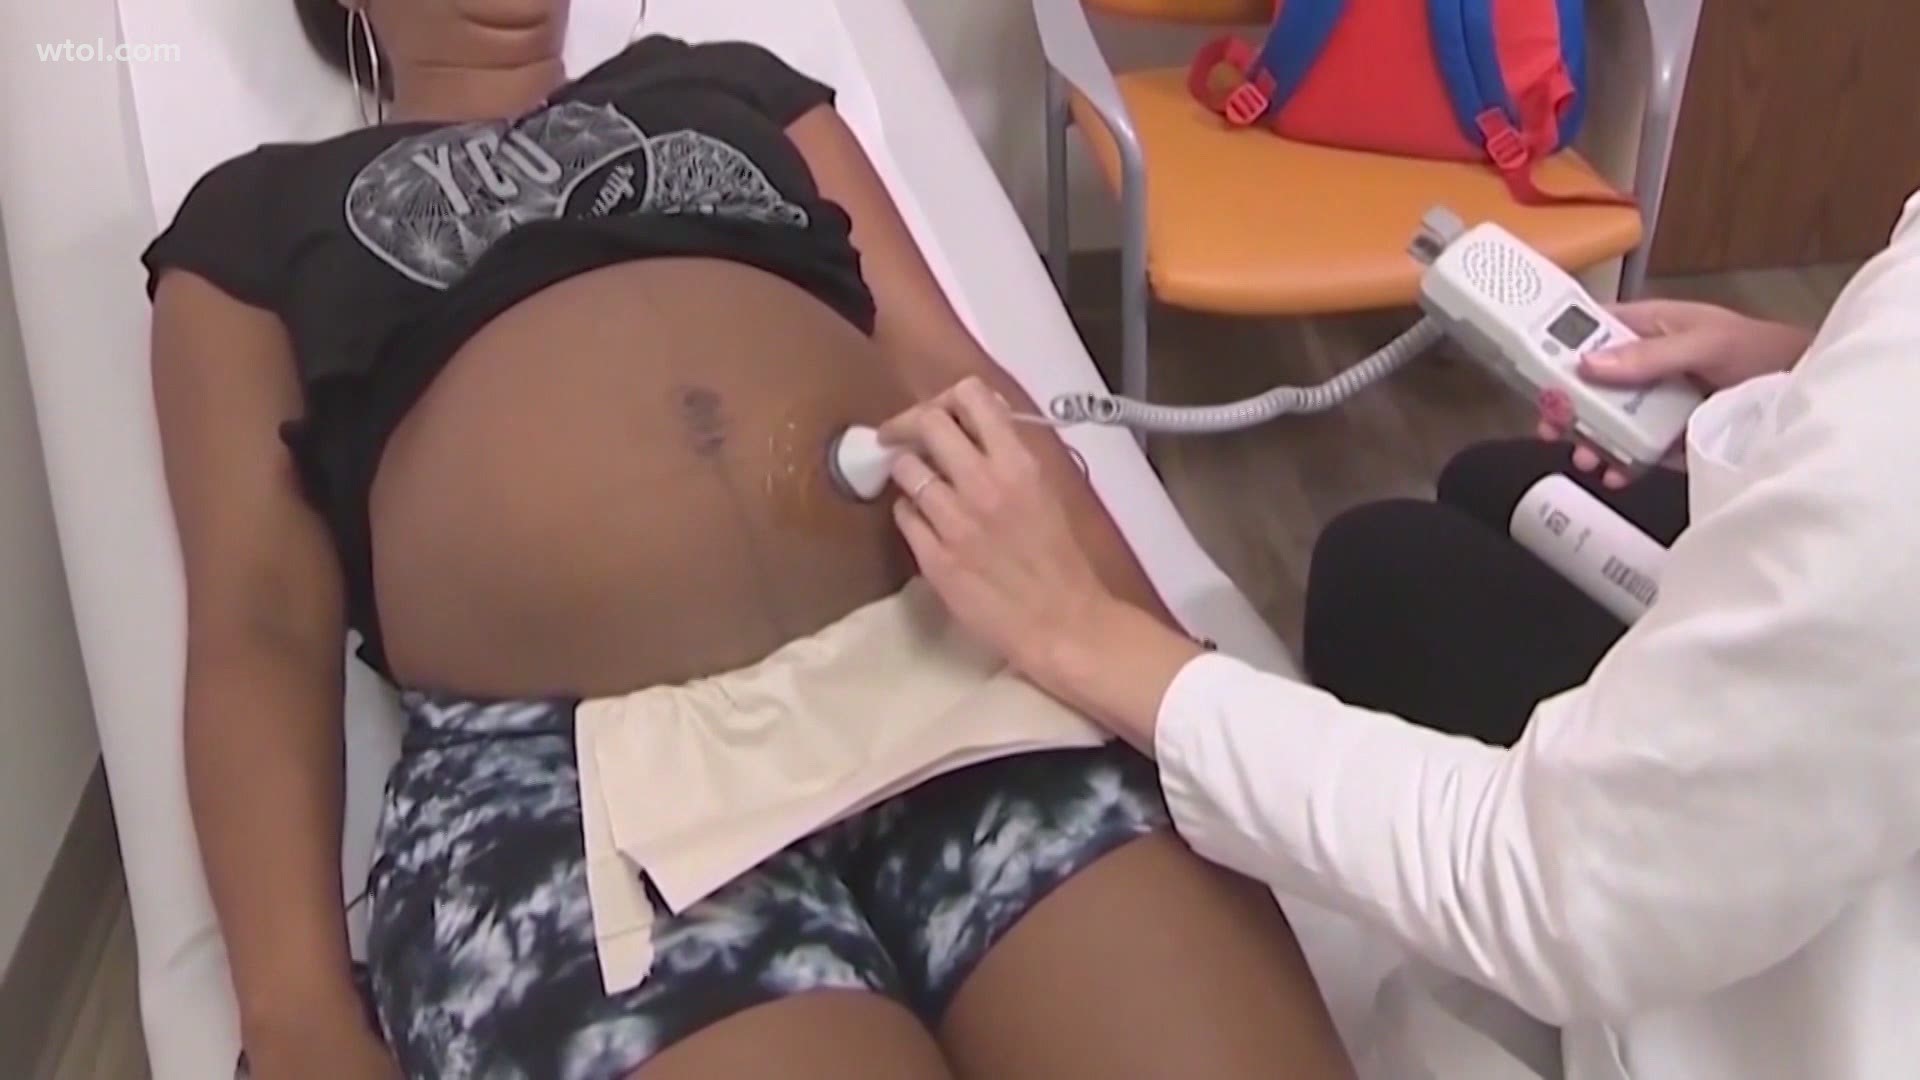 Health leaders say it's concerning because almost all of the pregnant patients hospitalized with COVID-19 are unvaccinated